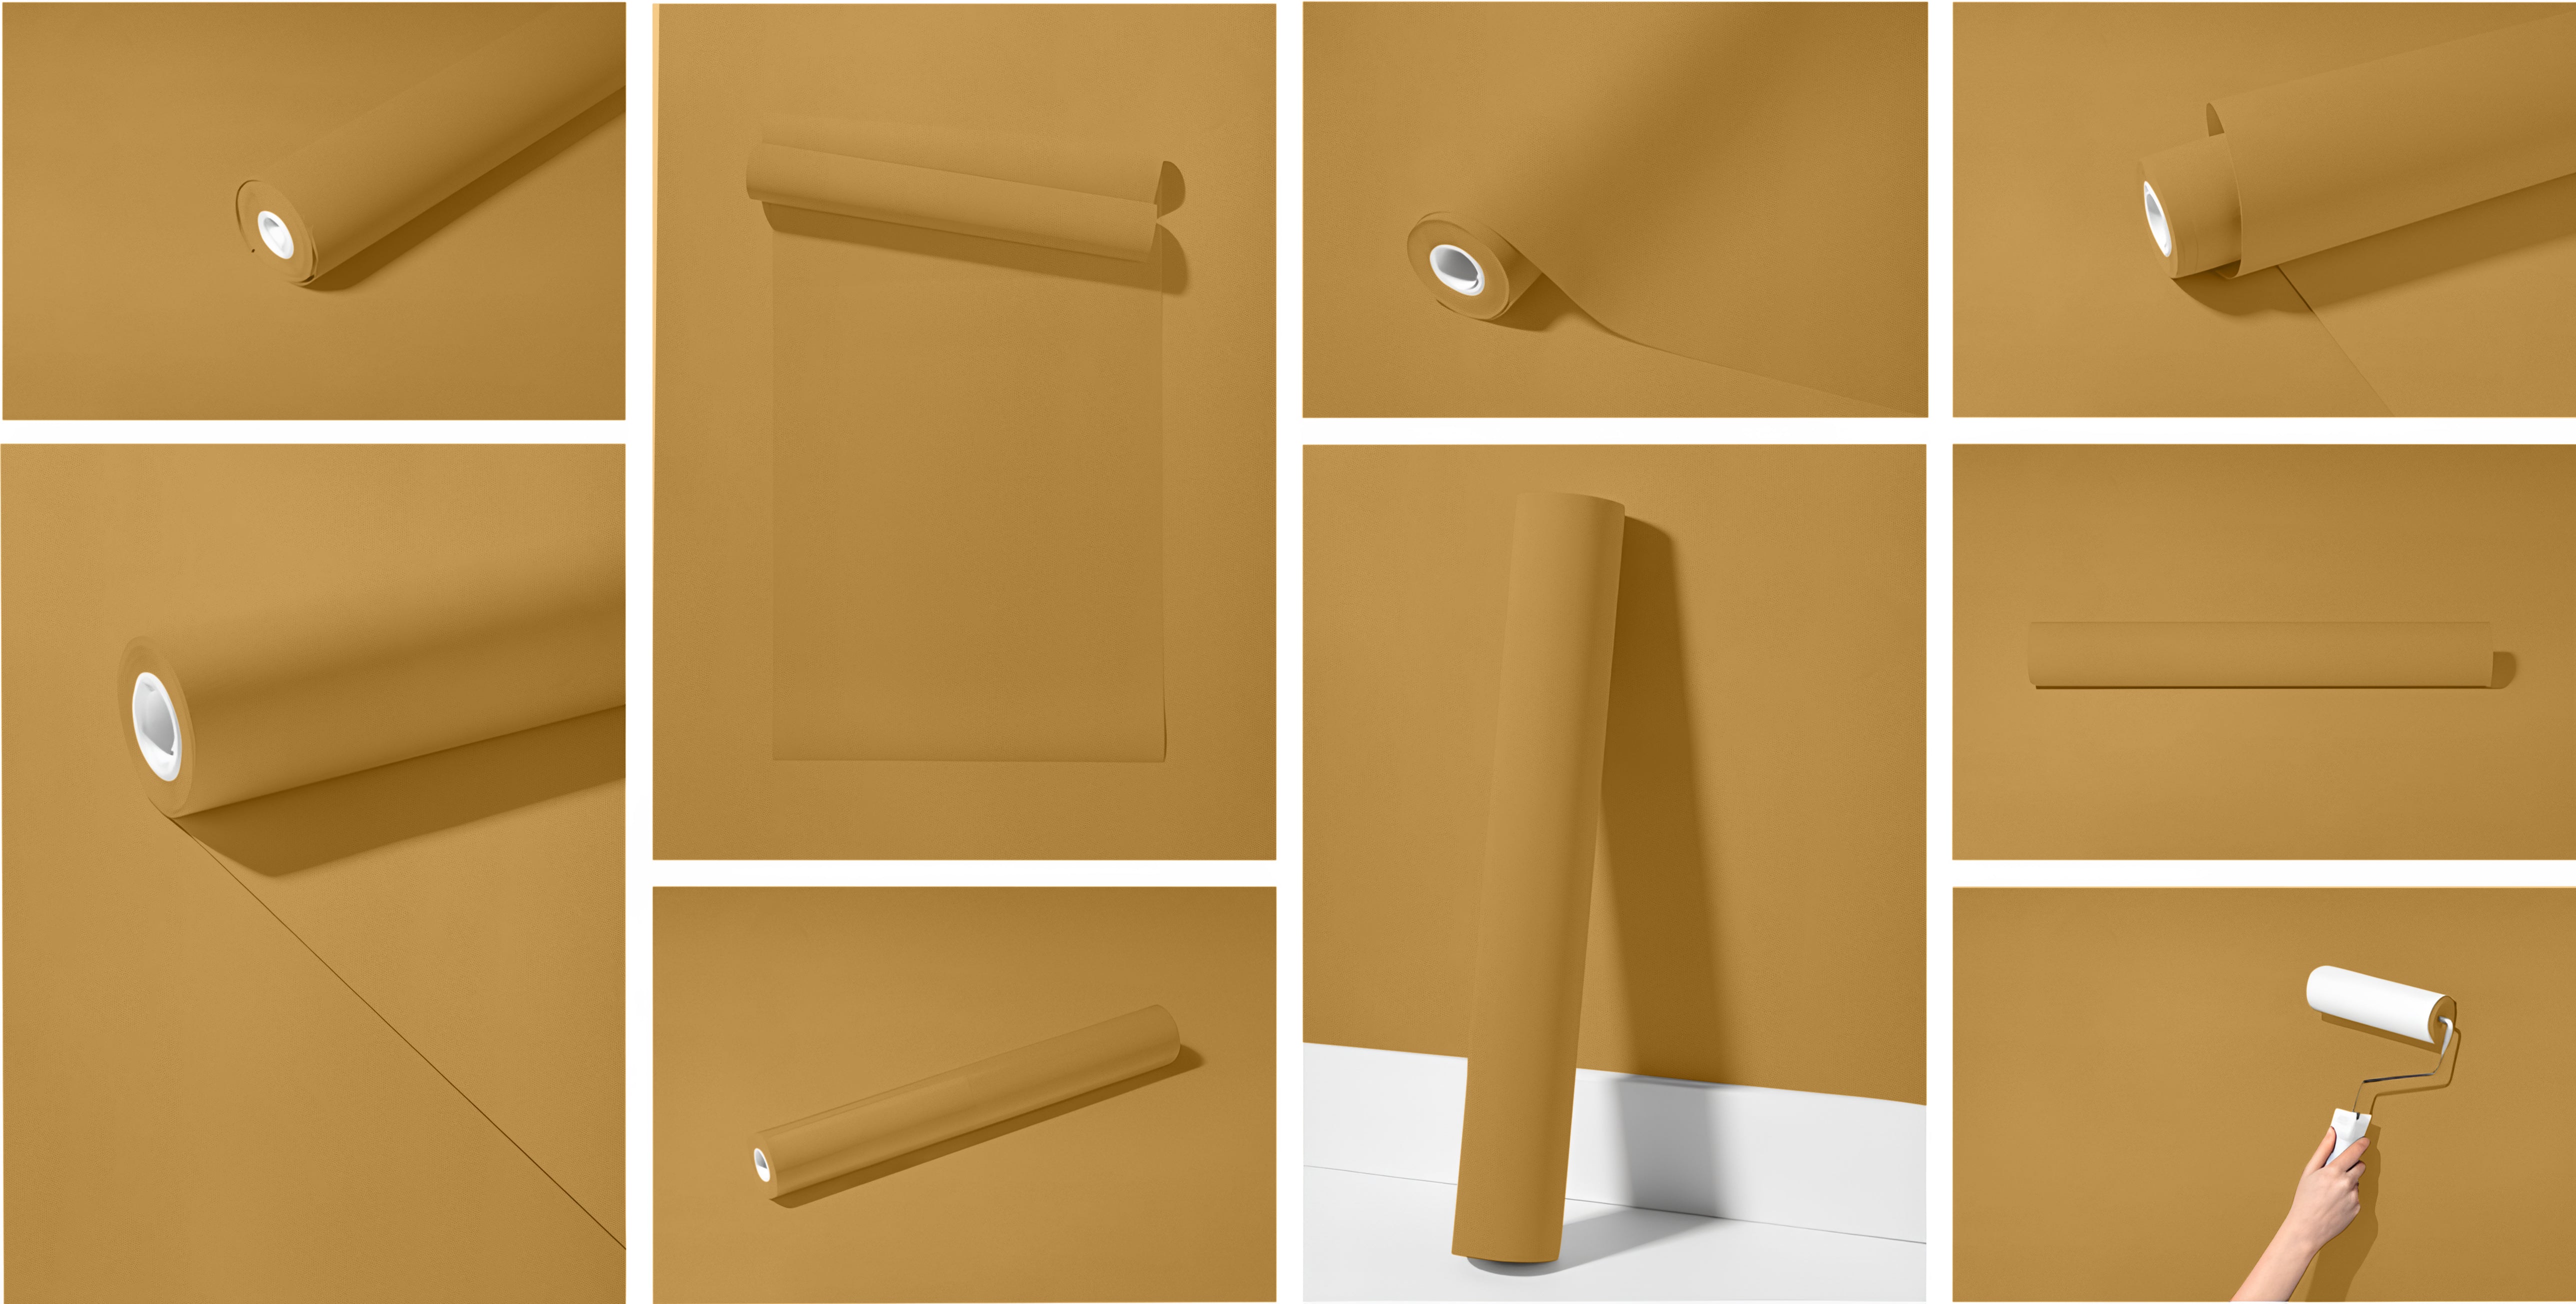 Peel & Stick Removable Re-usable Paint - Color RAL 1024 Ochre Yellow - offRAL™ - RALRAW LLC, USA